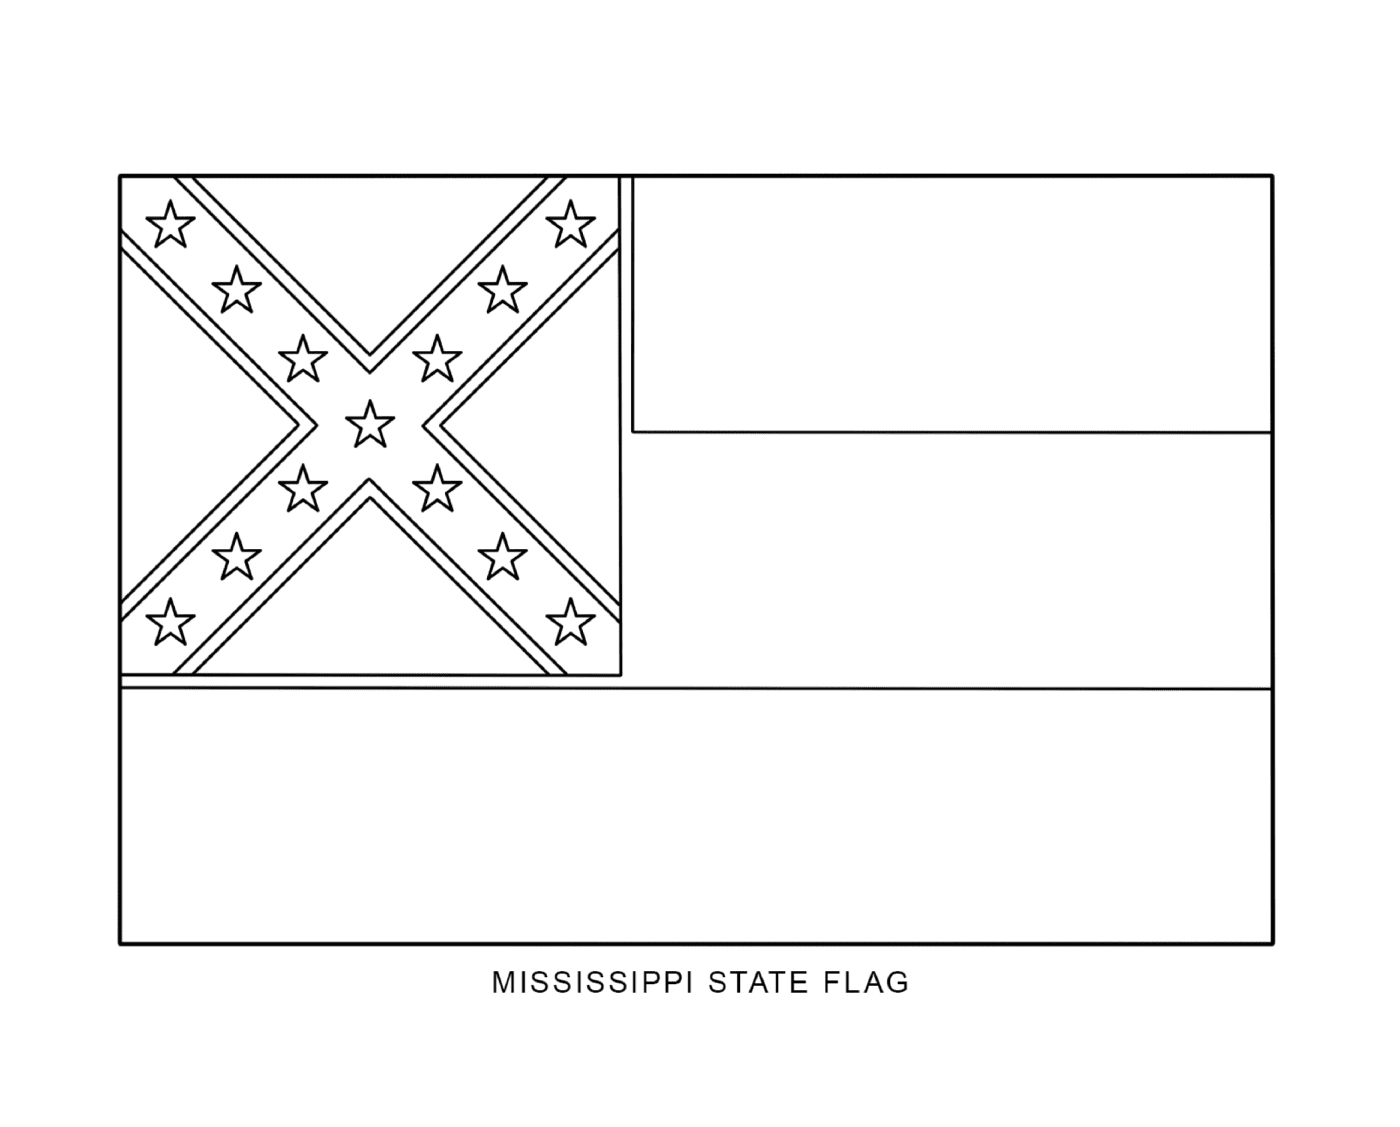  Flagge des Staates Mississippi 